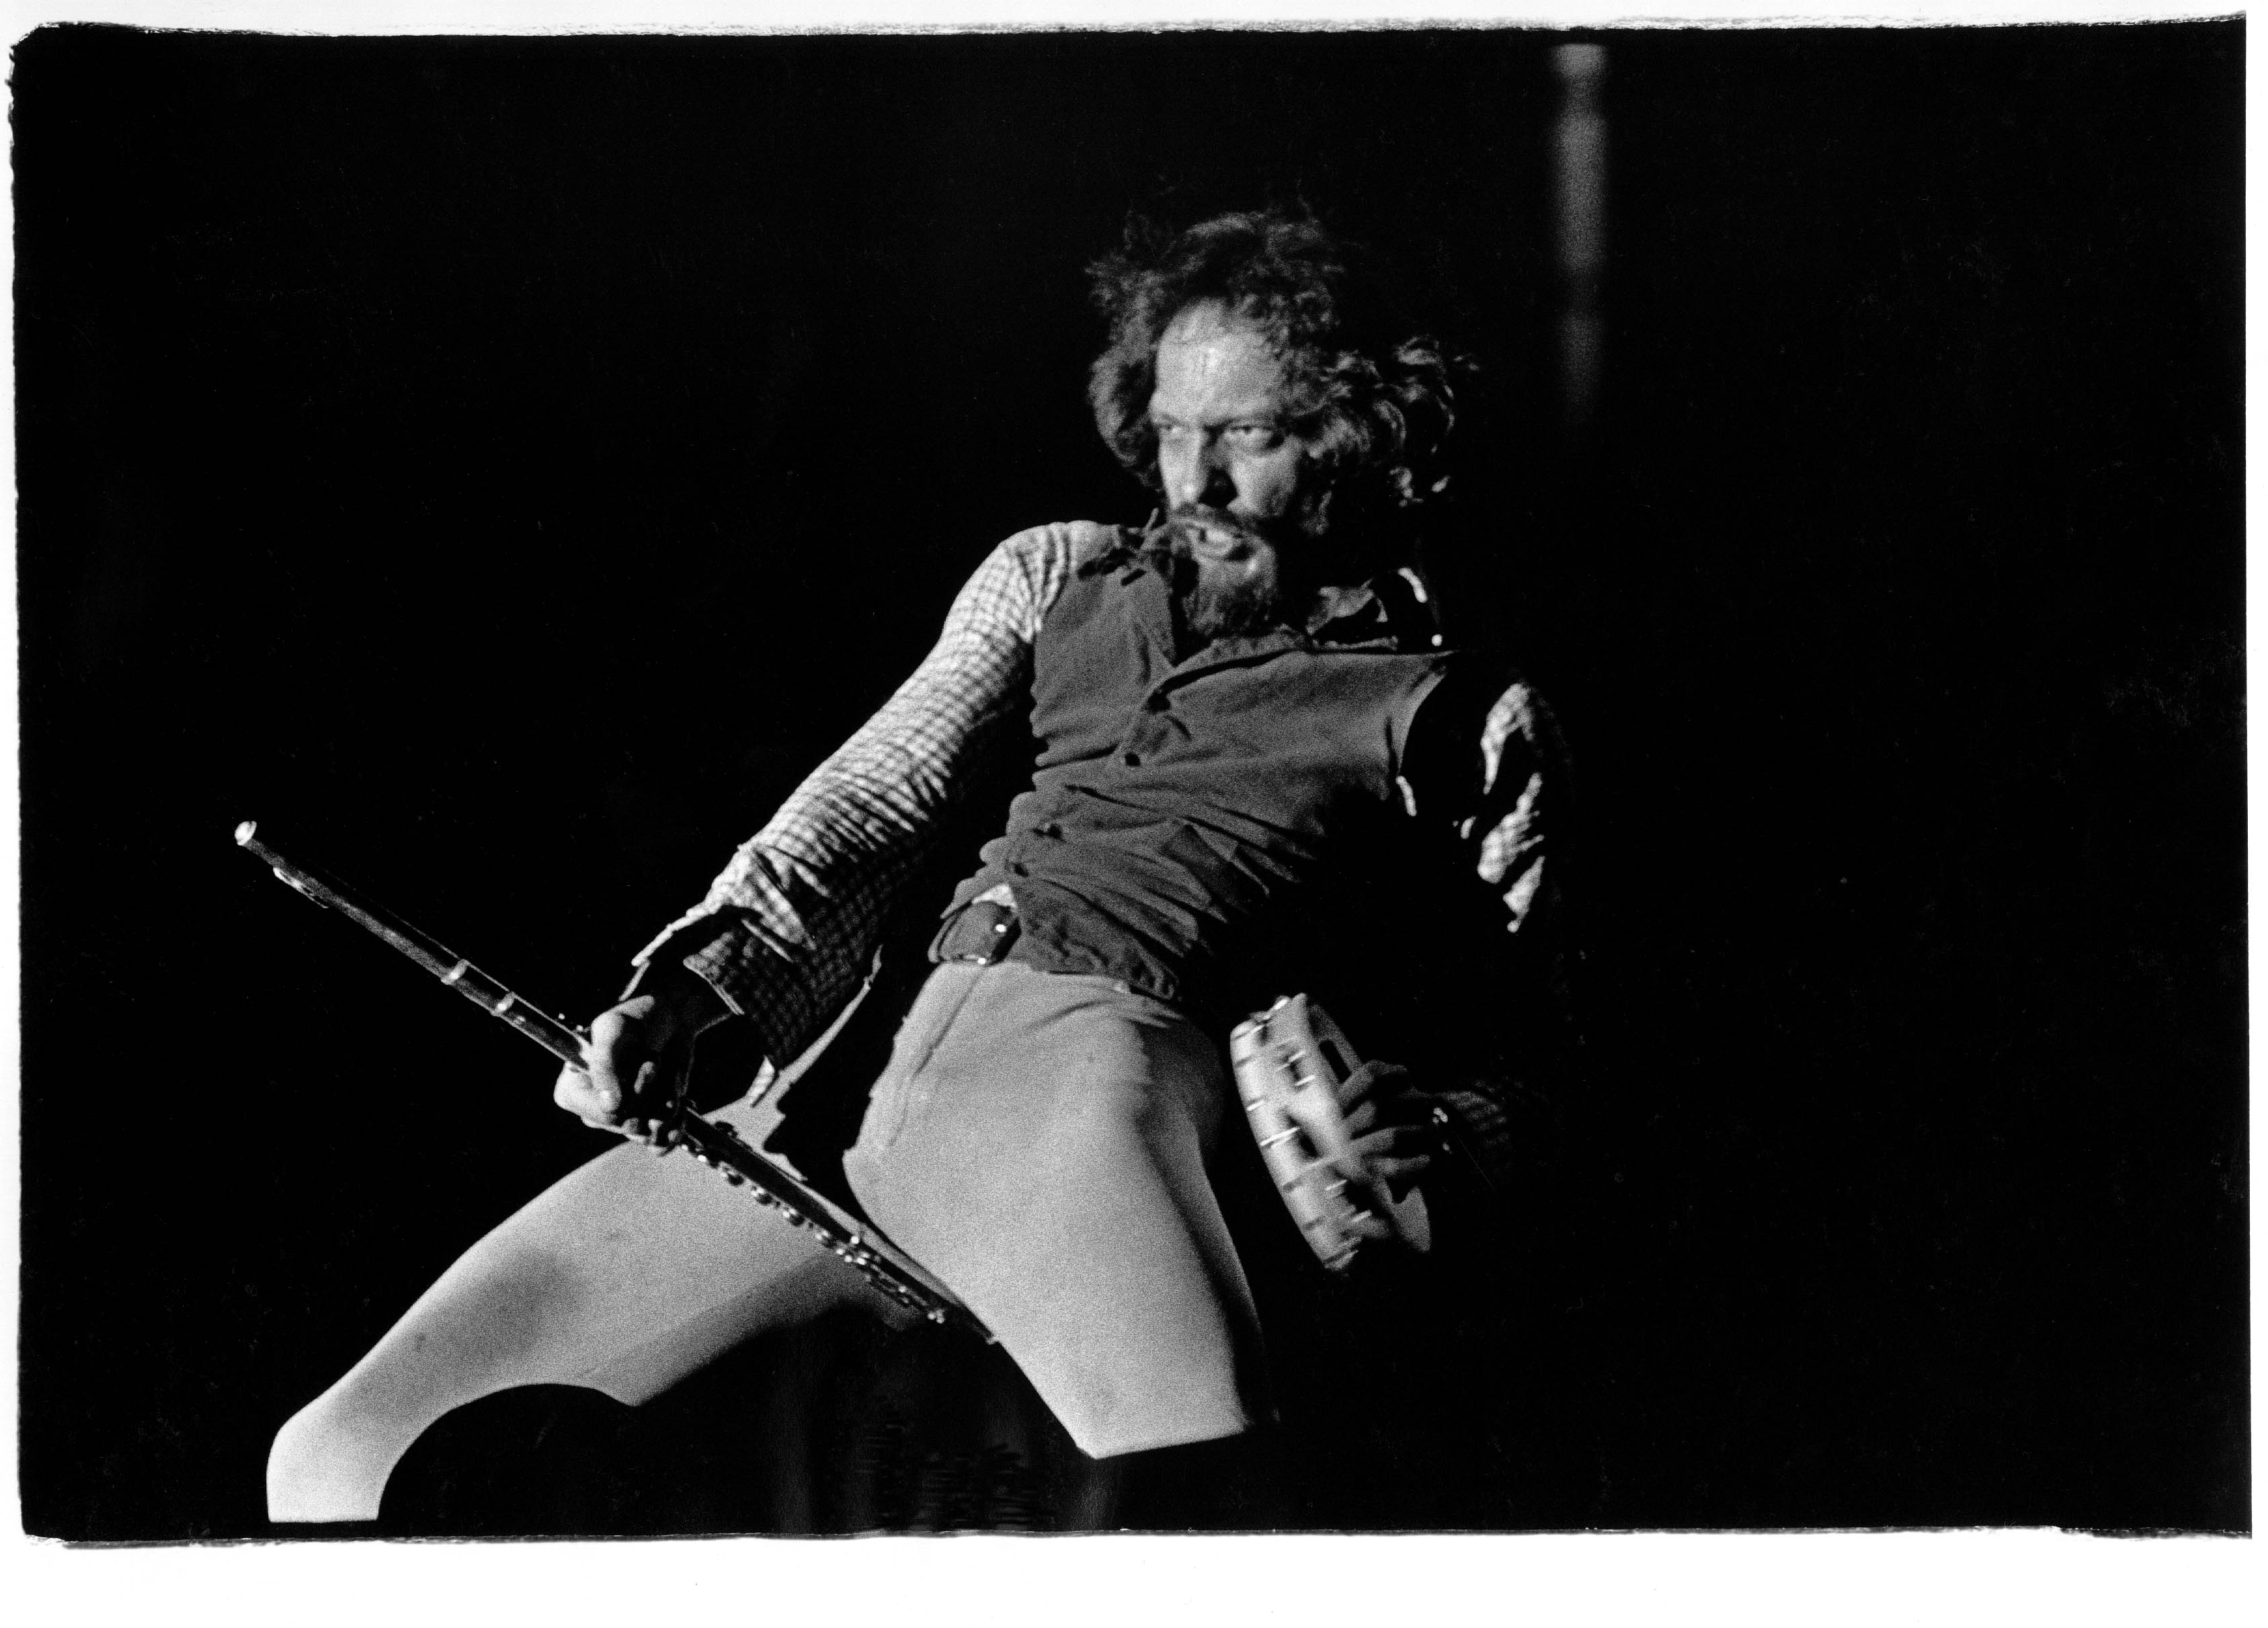 Ian Anderson by Thomas Wollenberger